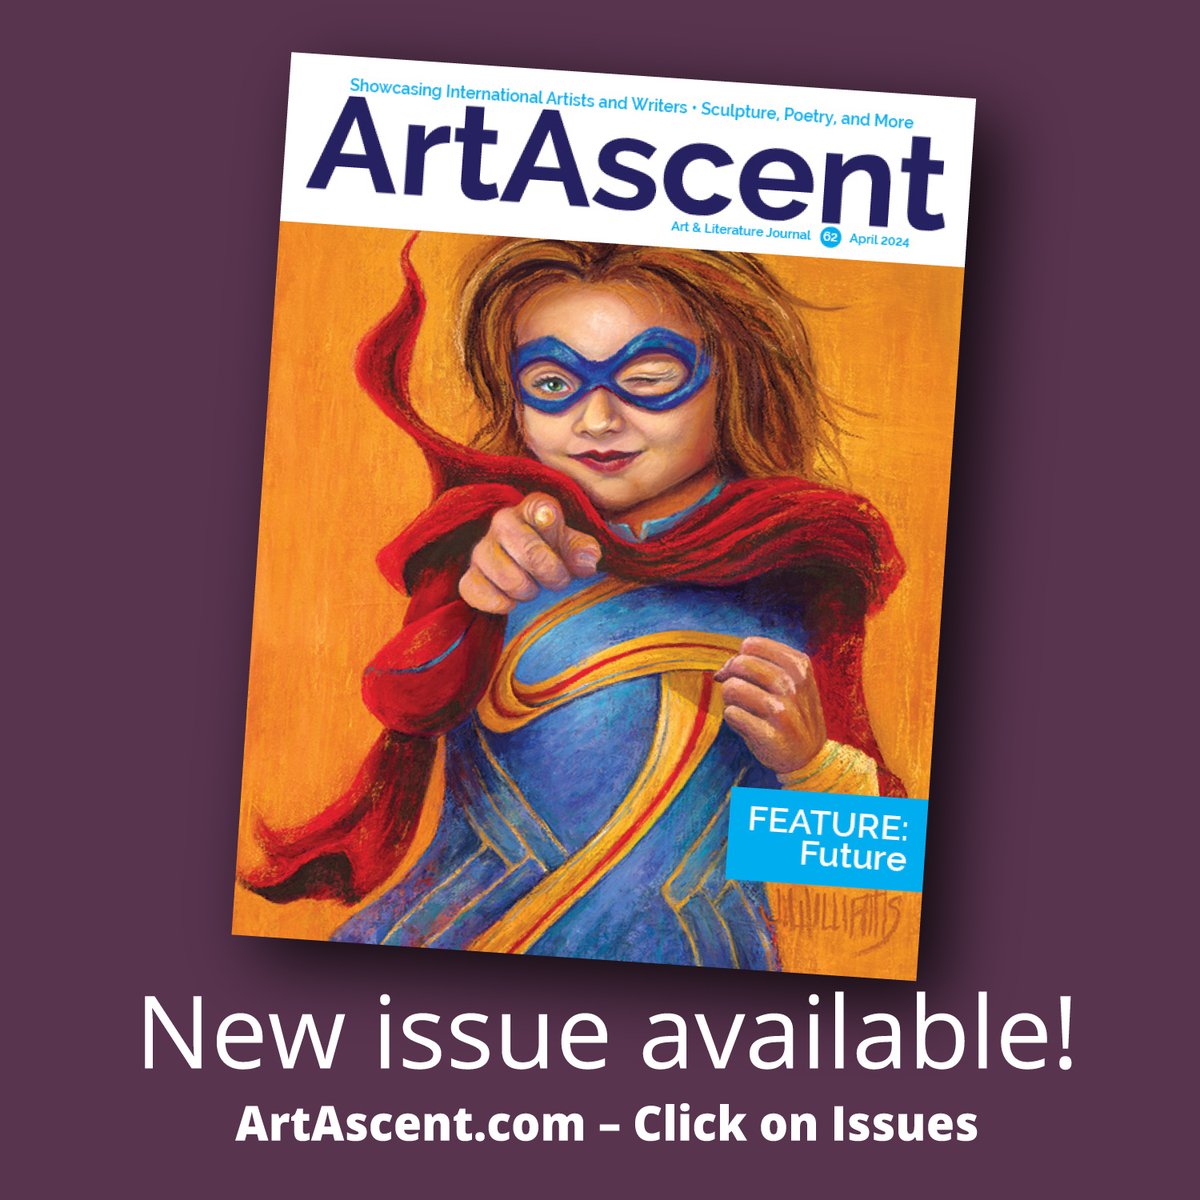 Congratulations! The Future artists have been selected. Visit ArtAscent.com to see them all. 

#FutureIssue #MagazineCover #ArtMagazine #ArtAscent #ArtCollector #ContemporaryArt